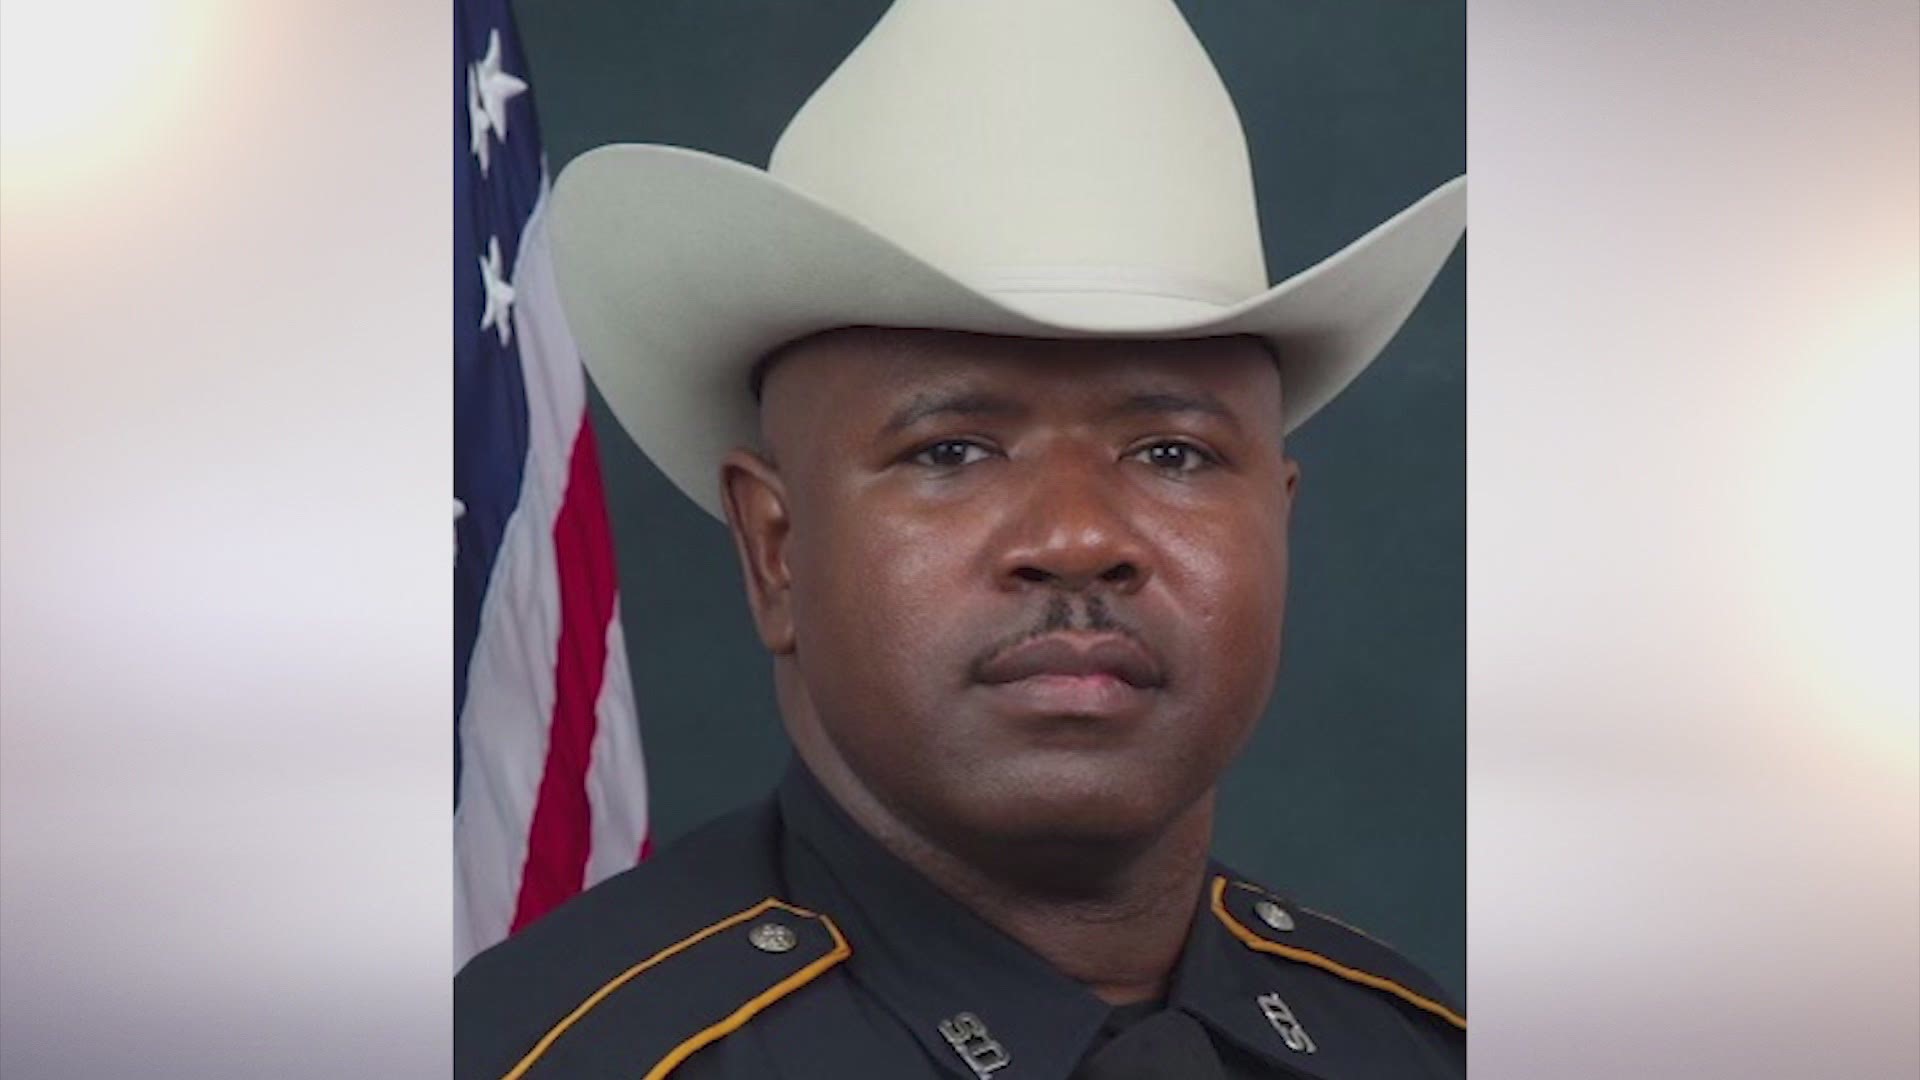 Sgt. Bruce Watson, a Harris County Sheriff's Office deputy, died after he was involved in a motorcycle crash in Pearland.